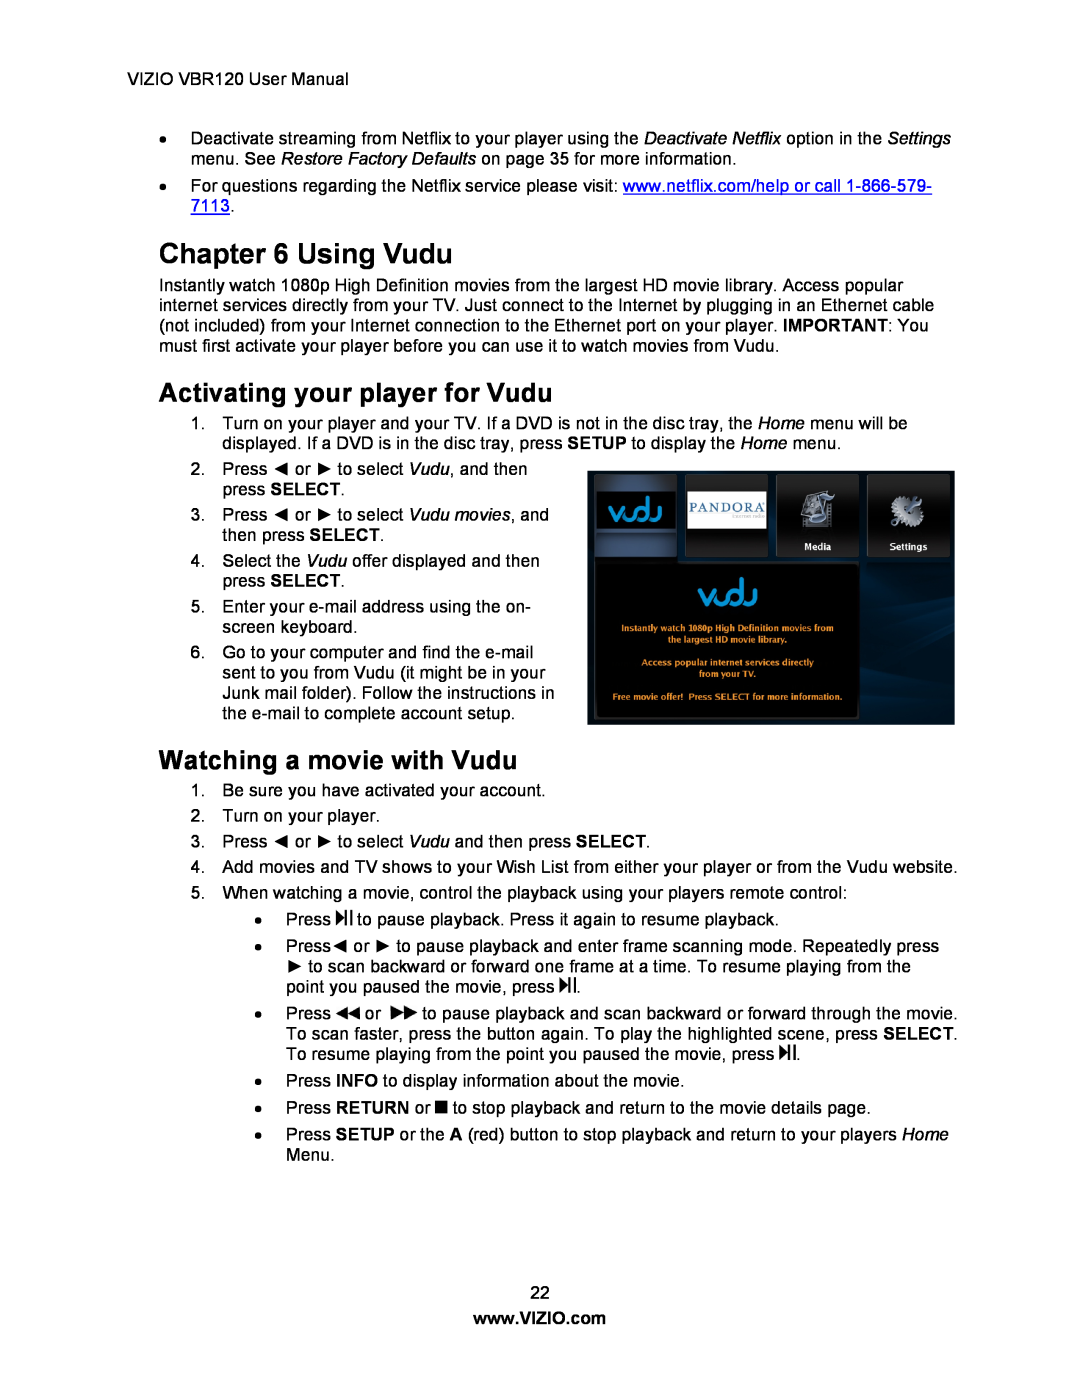 Vizio VBR 120 user manual Using Vudu, Activating your player for Vudu, Watching a movie with Vudu 